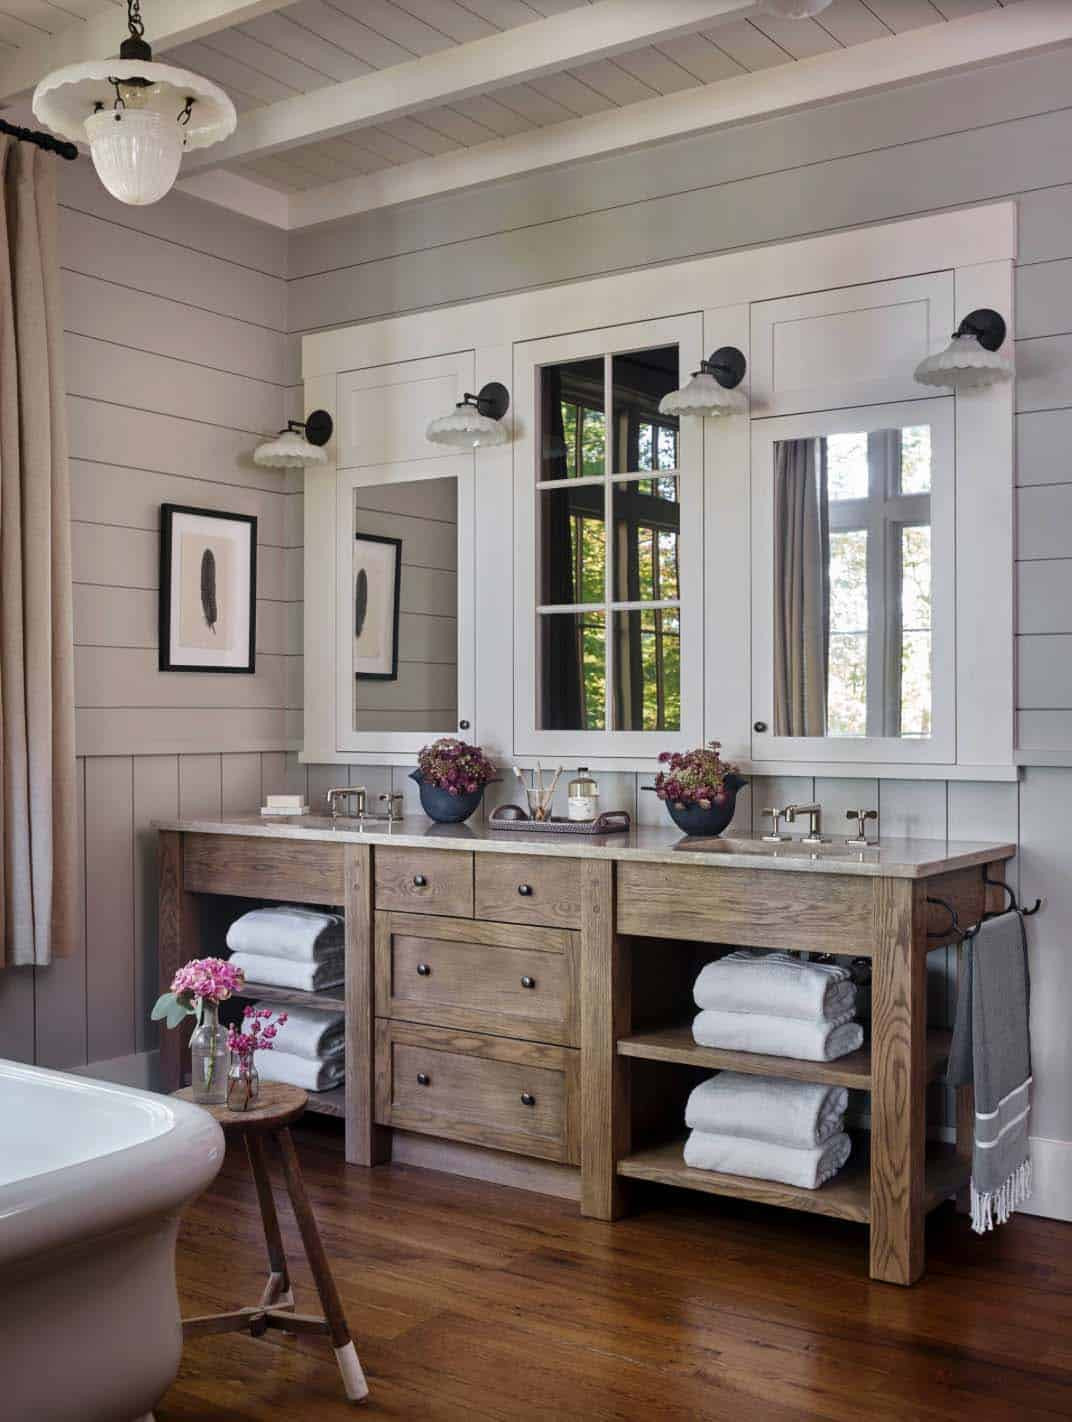 Lake House Bathroom Decor
 Whimsical lakeside cottage retreat with cozy interiors on